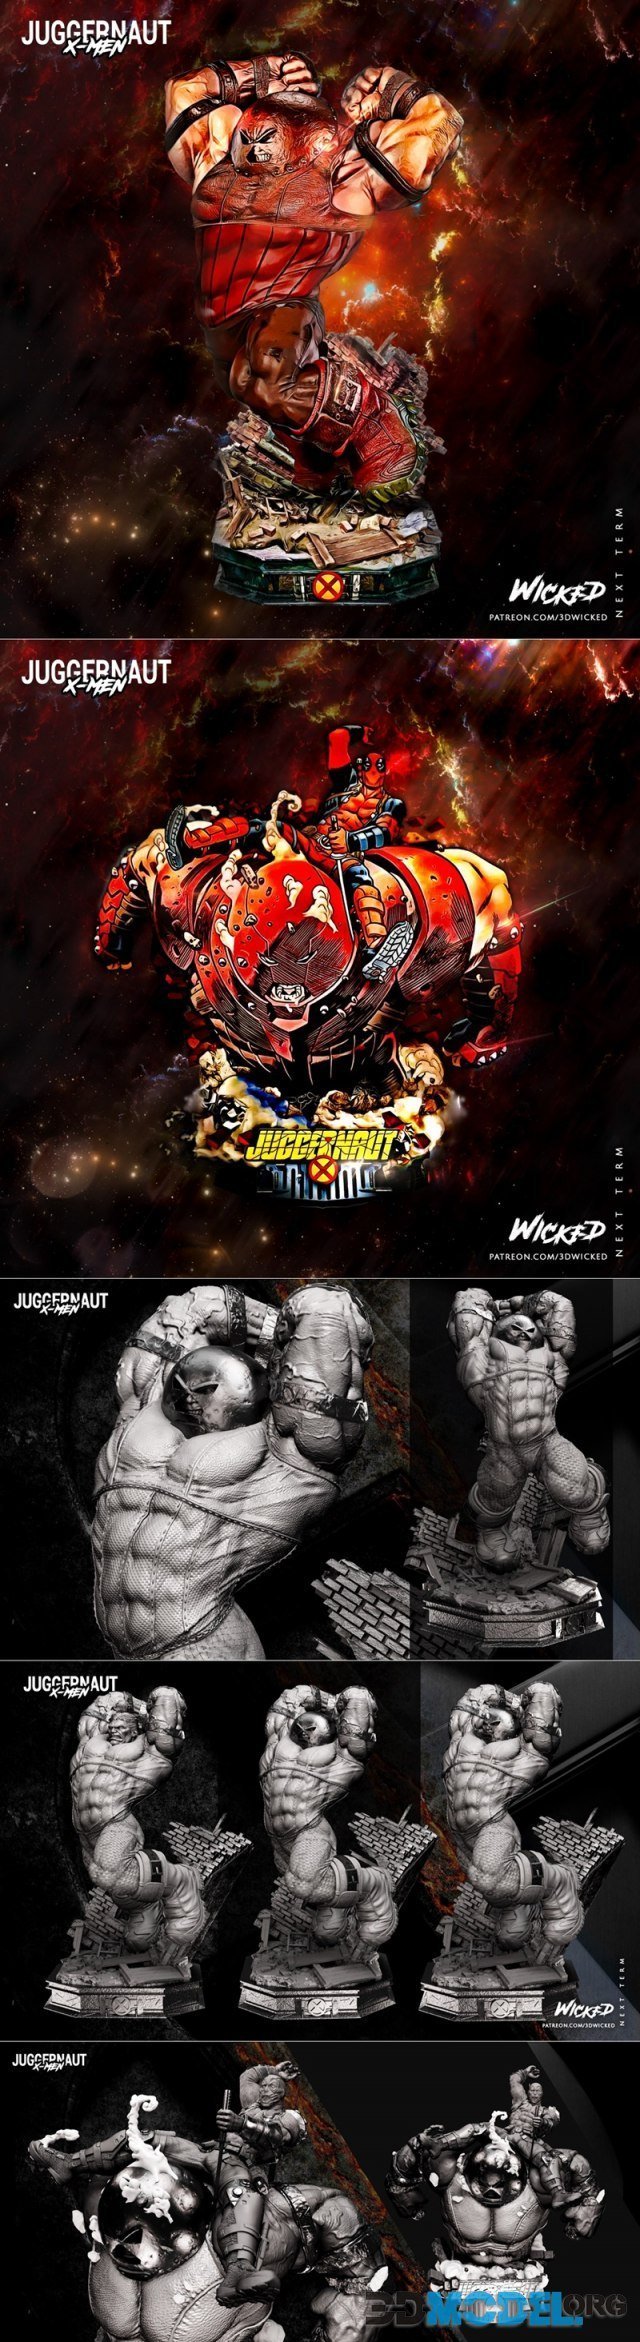 Wicked - Juggernaut and Bust – Printable